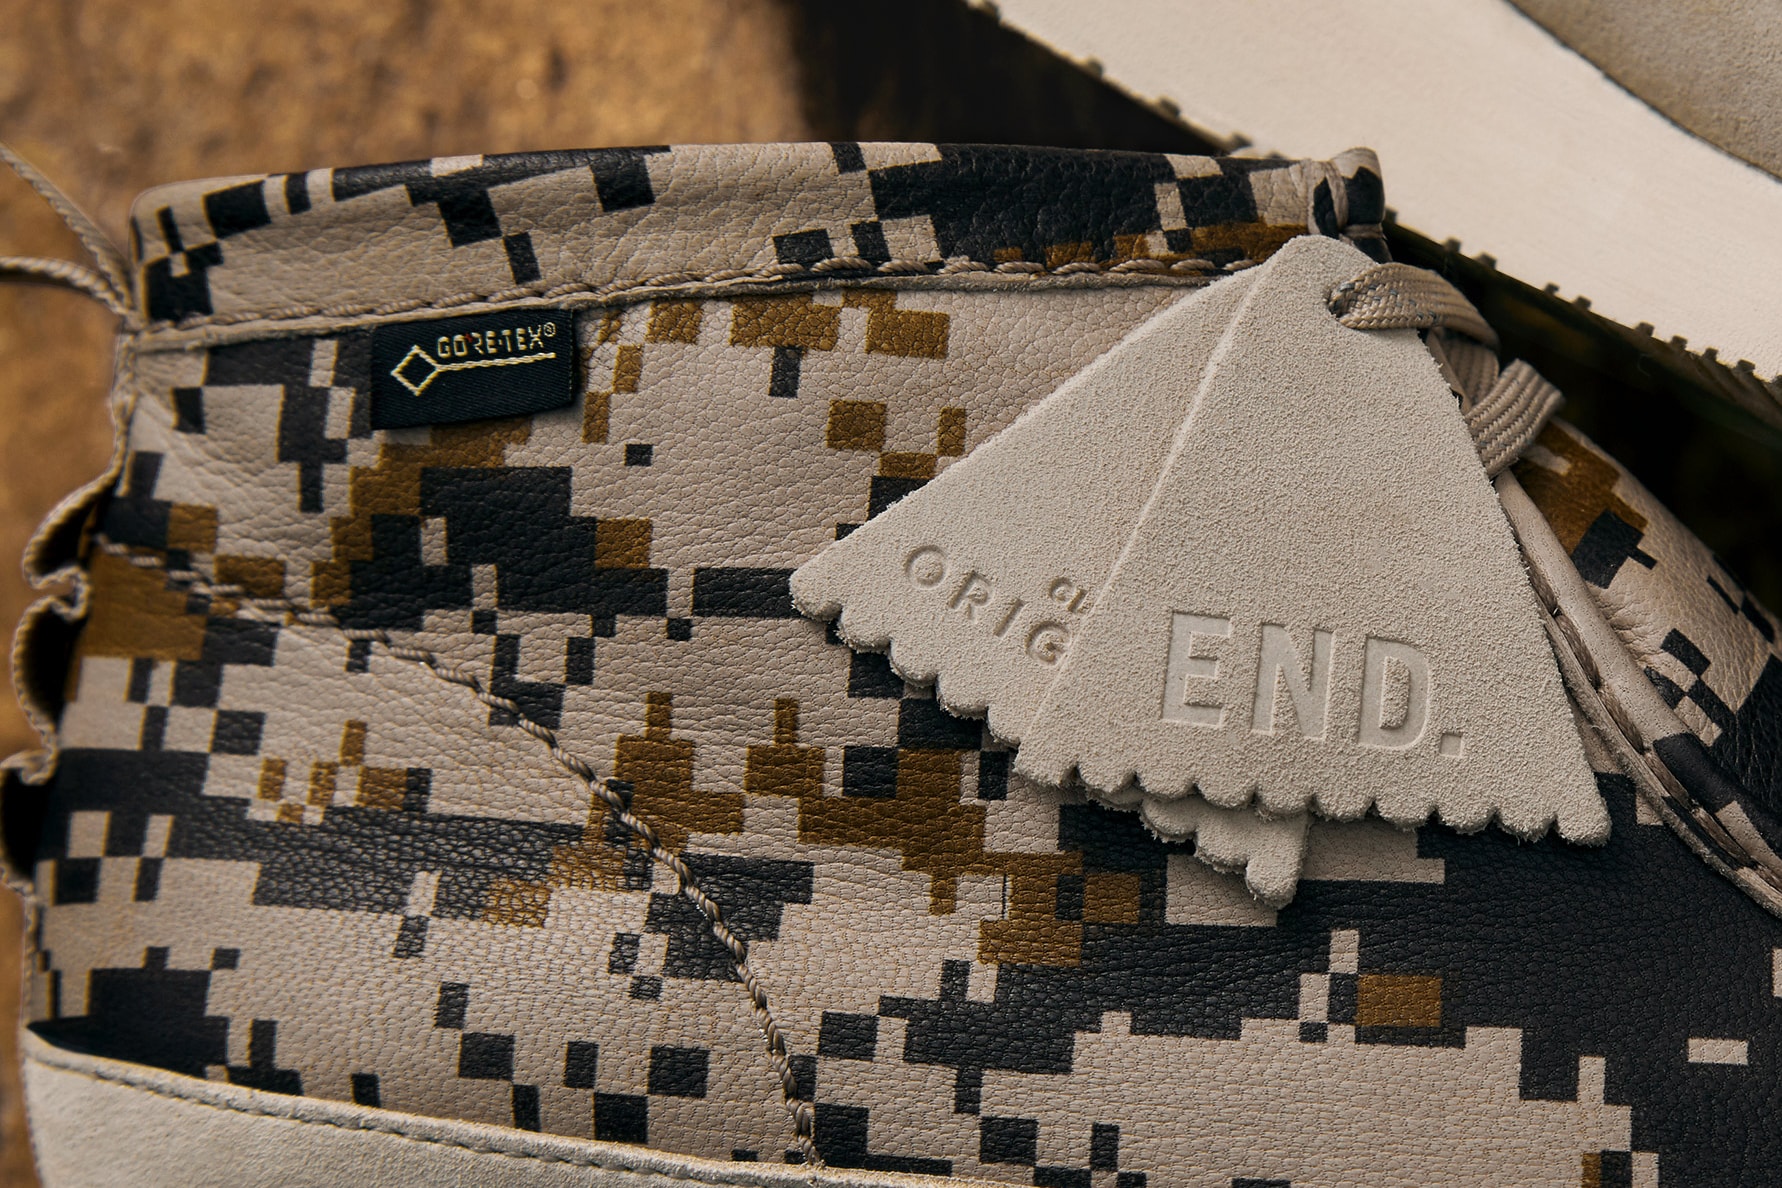 END. & Clarks Originals "Digi Camo" Capsule Info Clothing Footwear Wallabee GTX GORE-TEX heritage footwear classic shoes fashion style Clarks UK